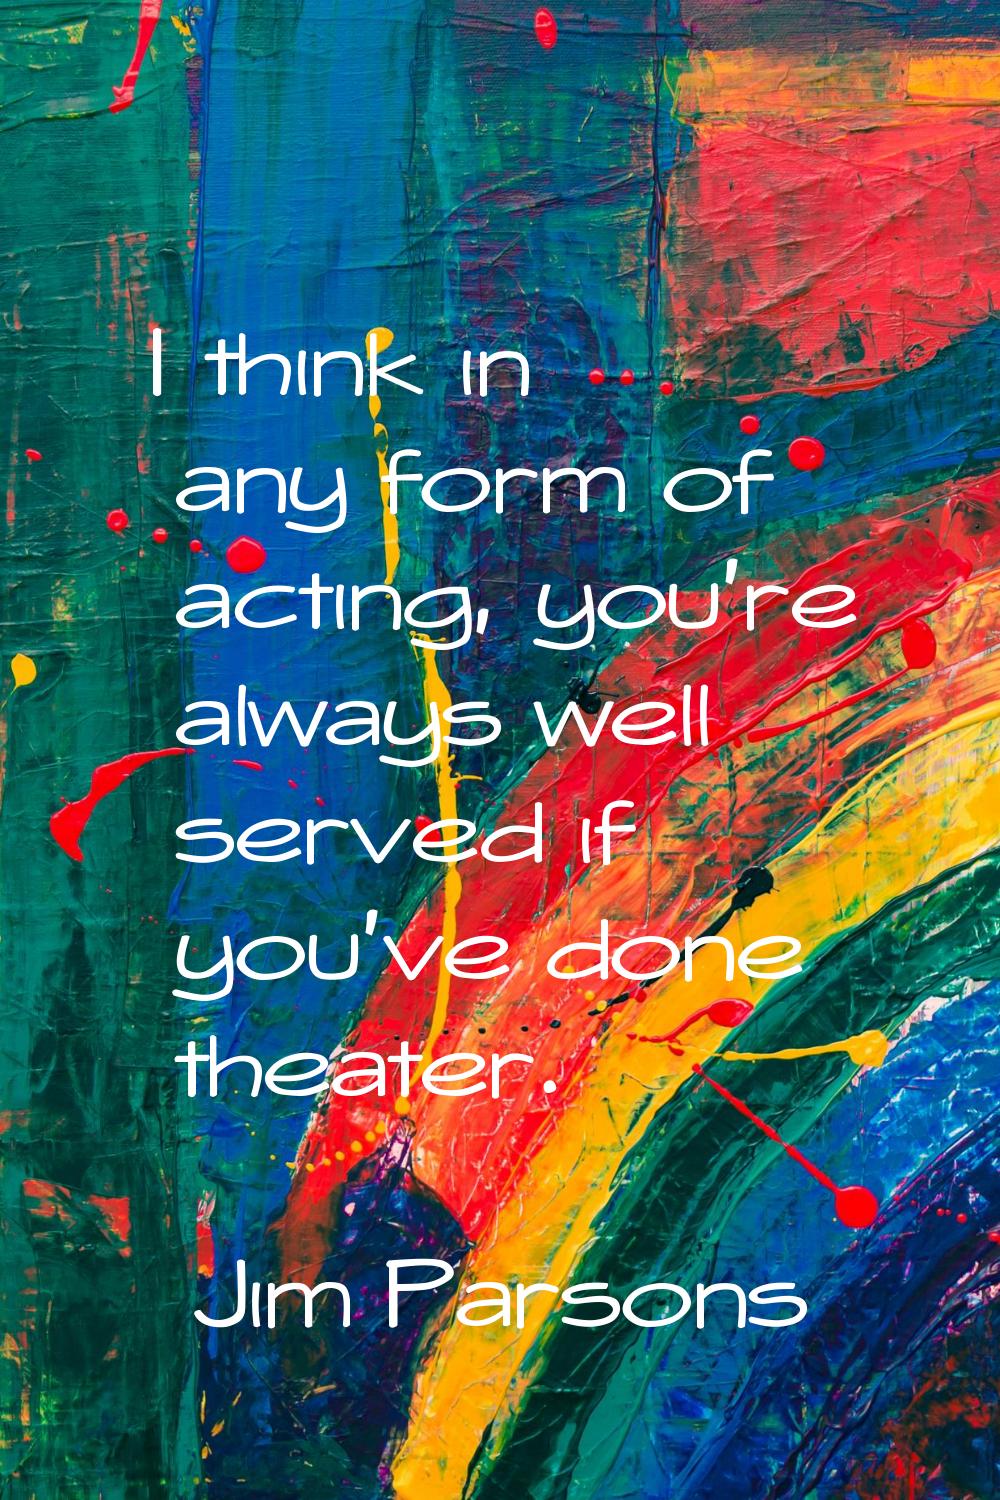 I think in any form of acting, you're always well served if you've done theater.